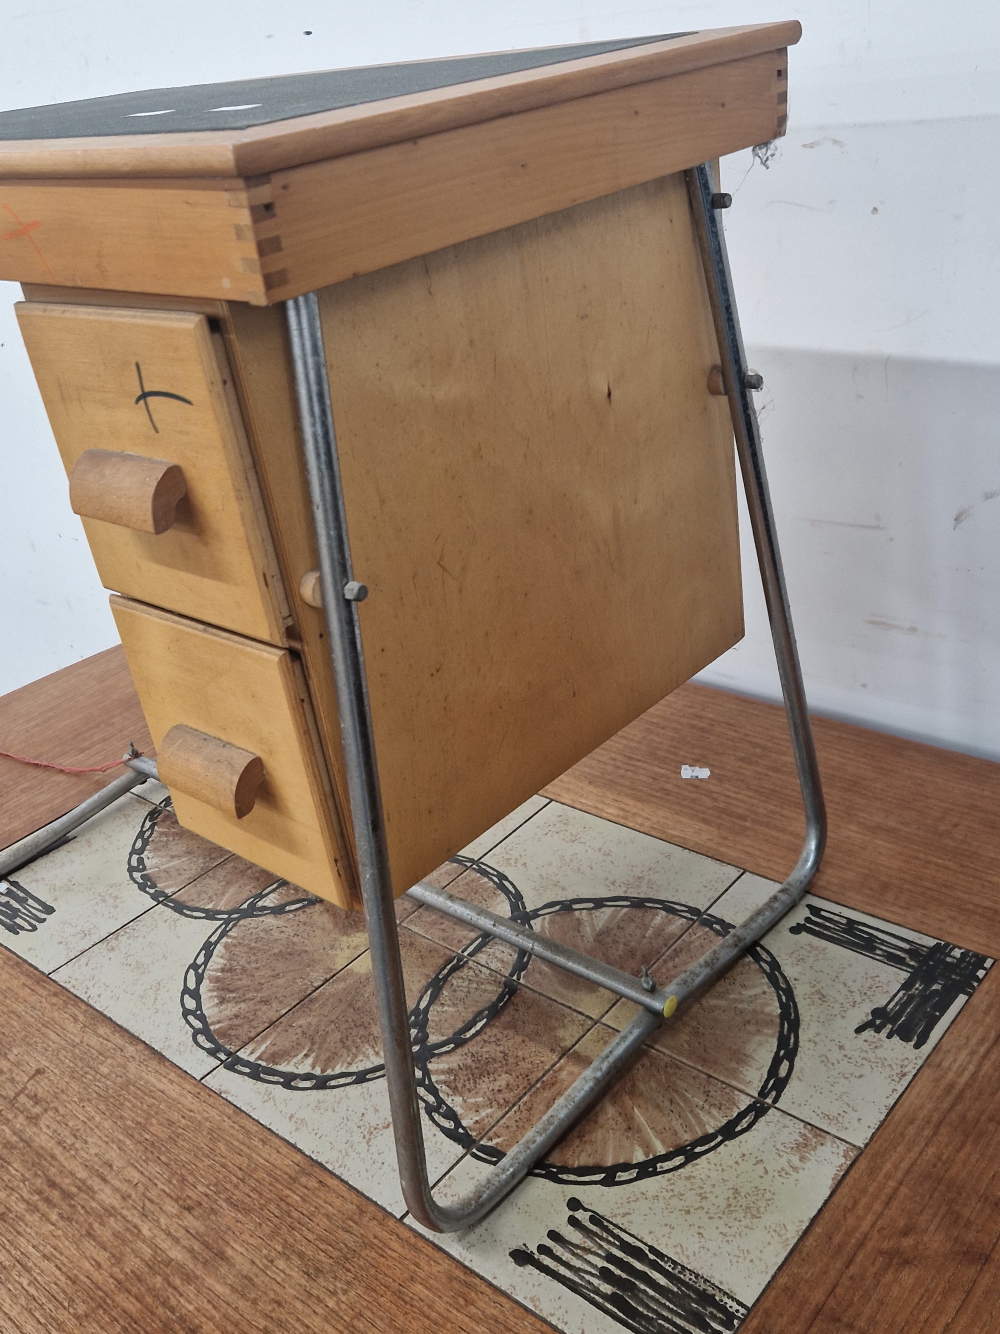 A VINTAGE 1960'S/ 70'S CHILDS DESK WITH CHROME LEGS. - Image 2 of 2